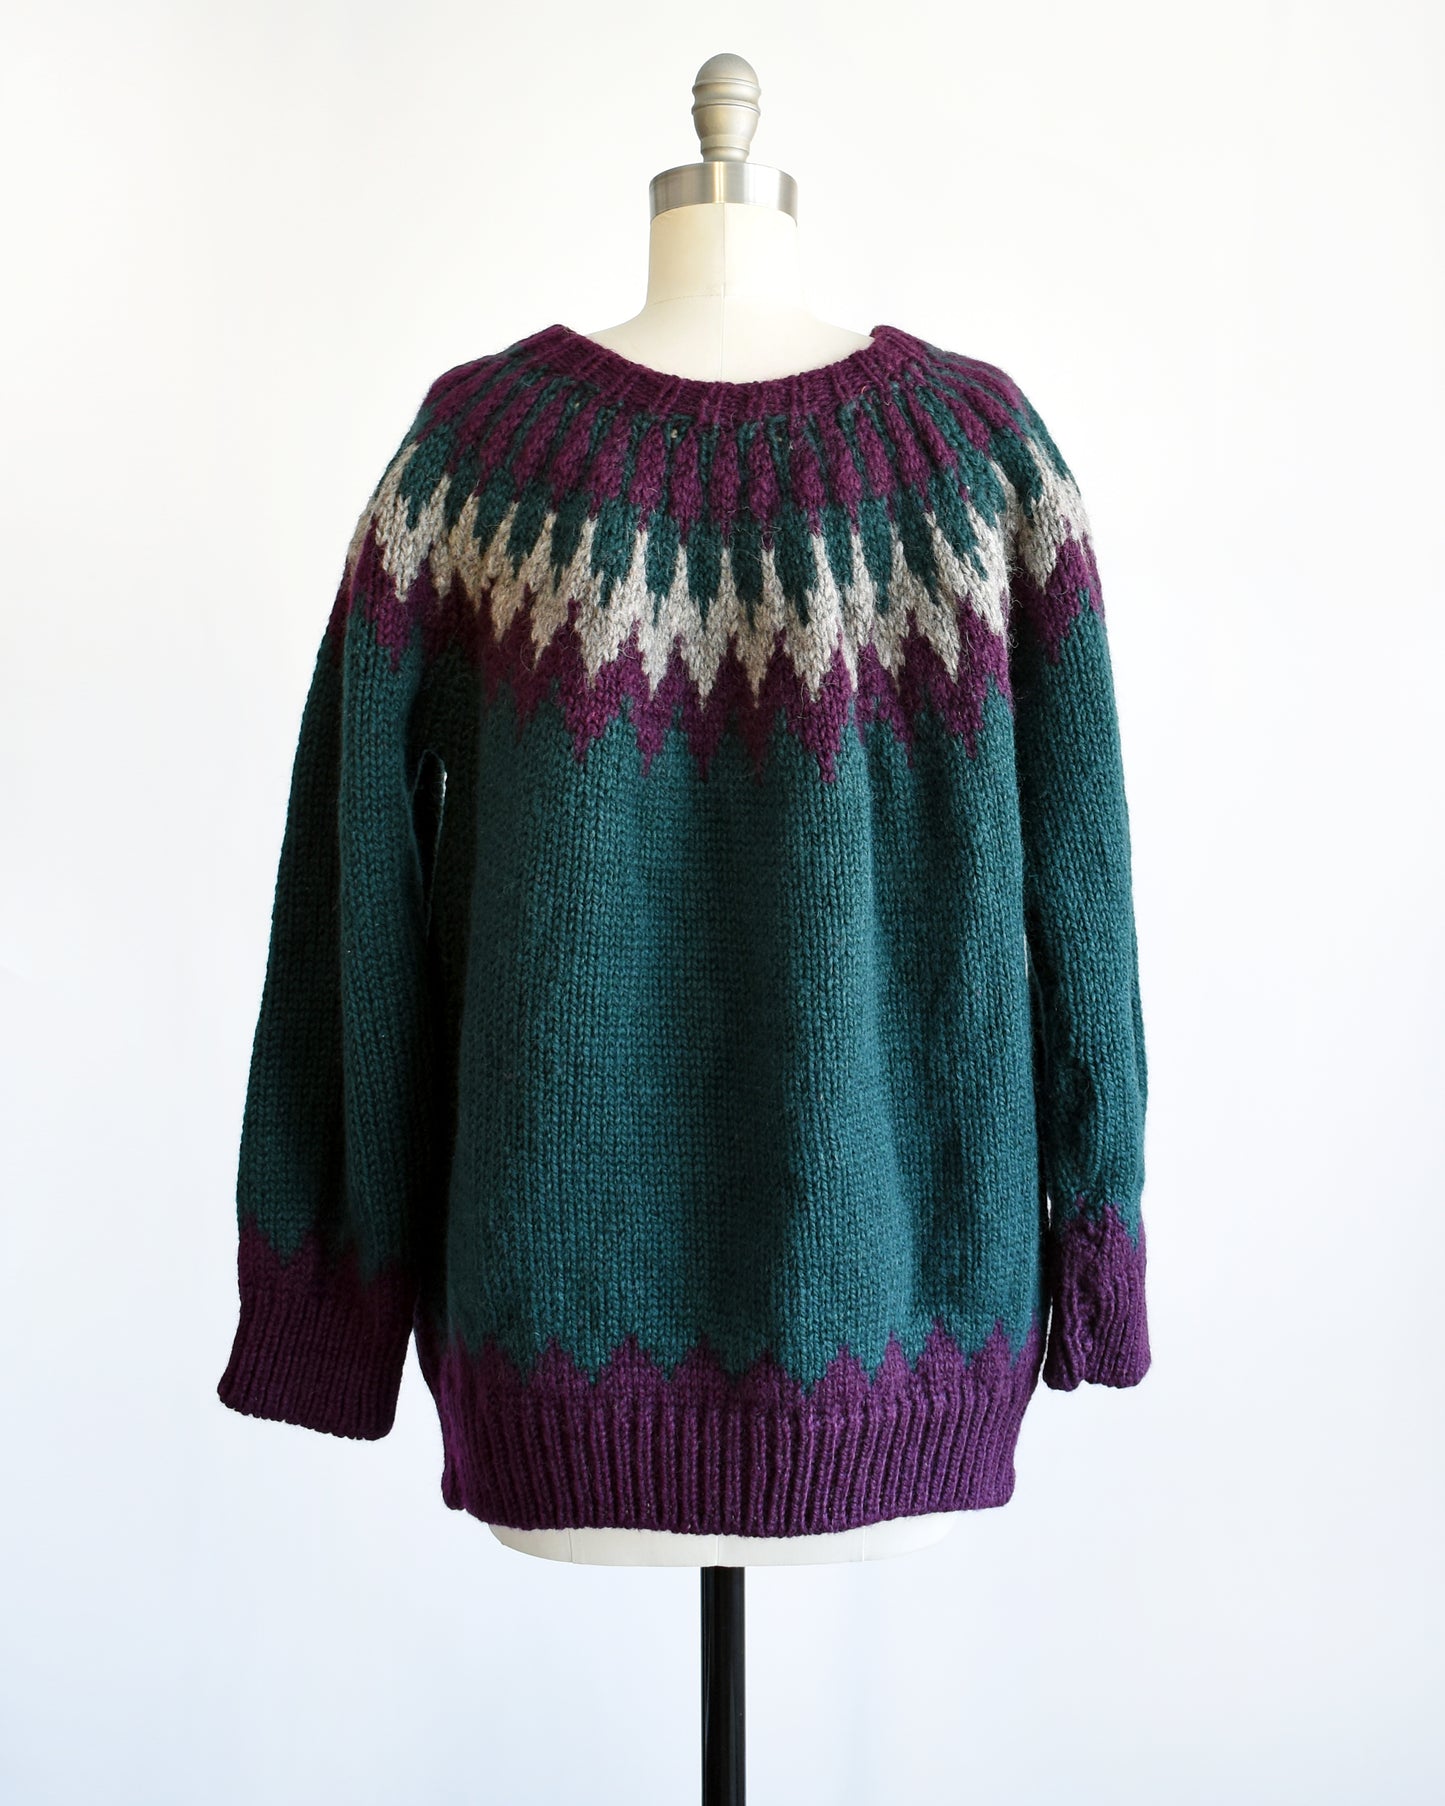 Back view of a vintage 1970s dark teal wool Nordic sweater with a purple and gray Fair Isle pattern around the collar. Complimentary purple pattern on the hem and cuffs.